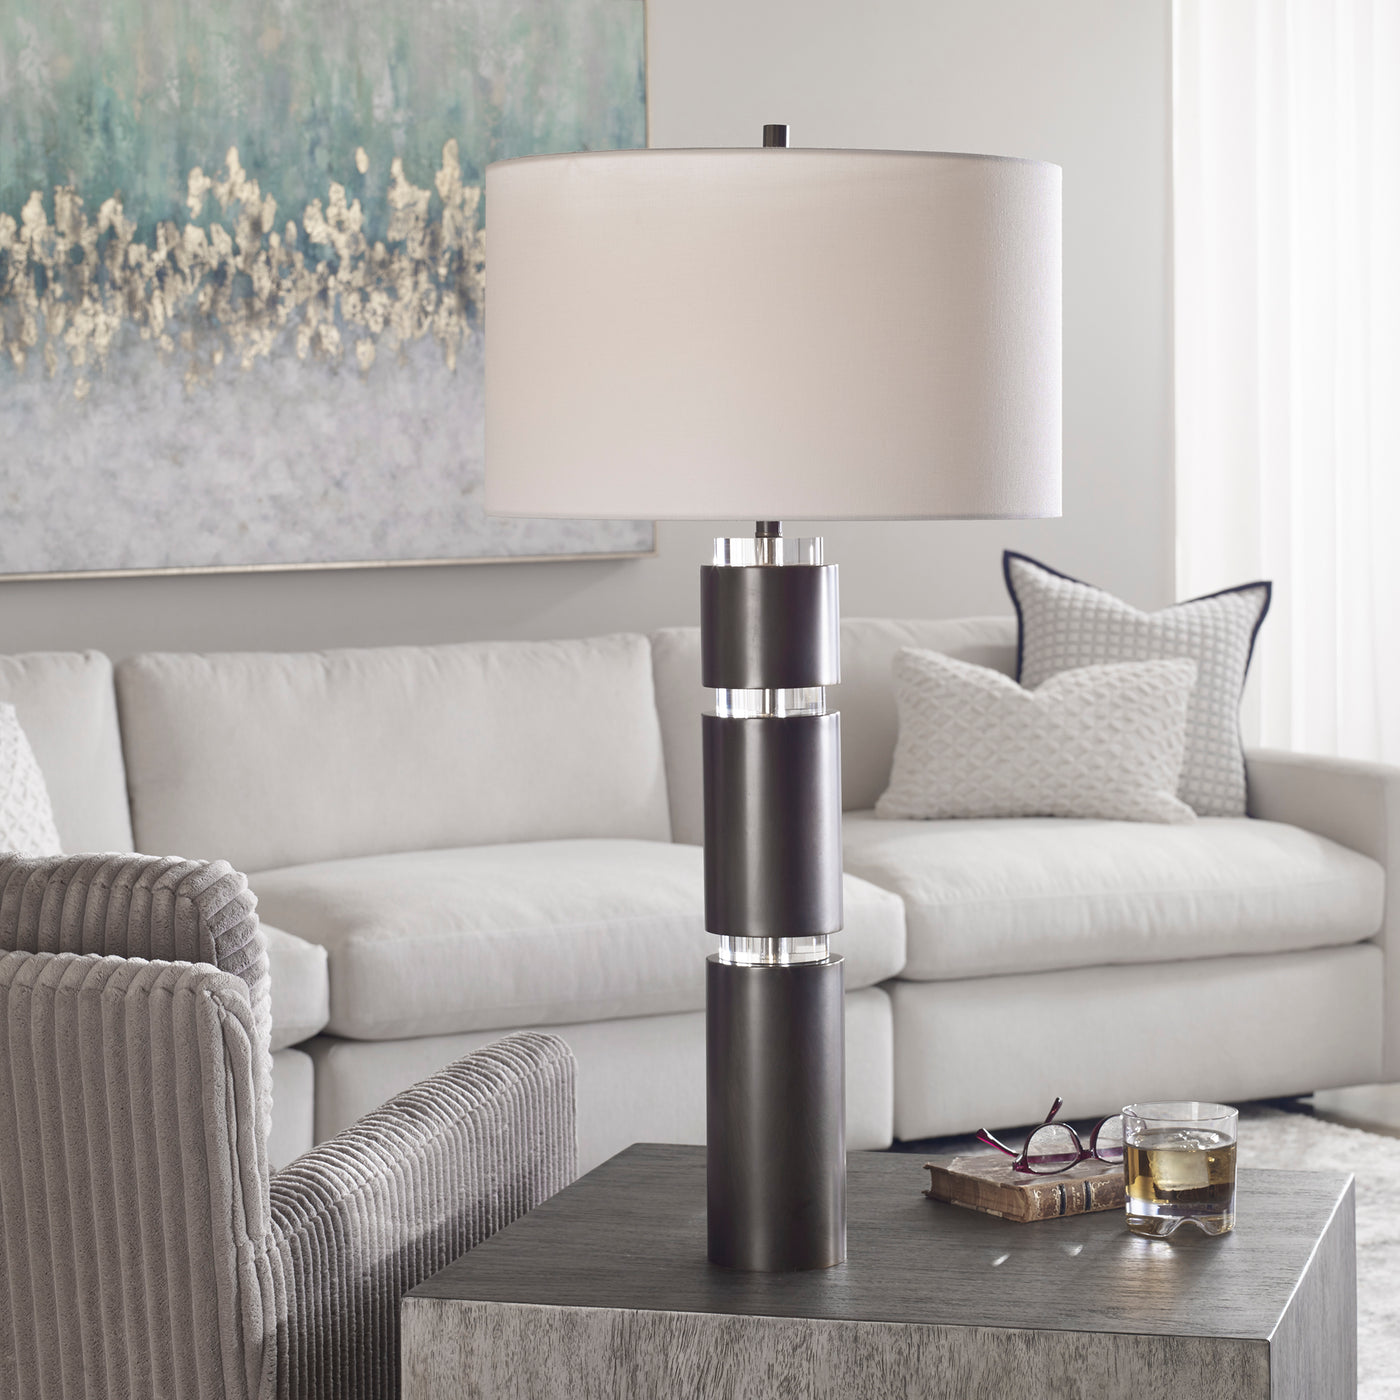 This Table Lamp Features A Sophisticated Design By Pairing Stacked Steel Columns In A Dark Bronze Finish With Elegant Crys...